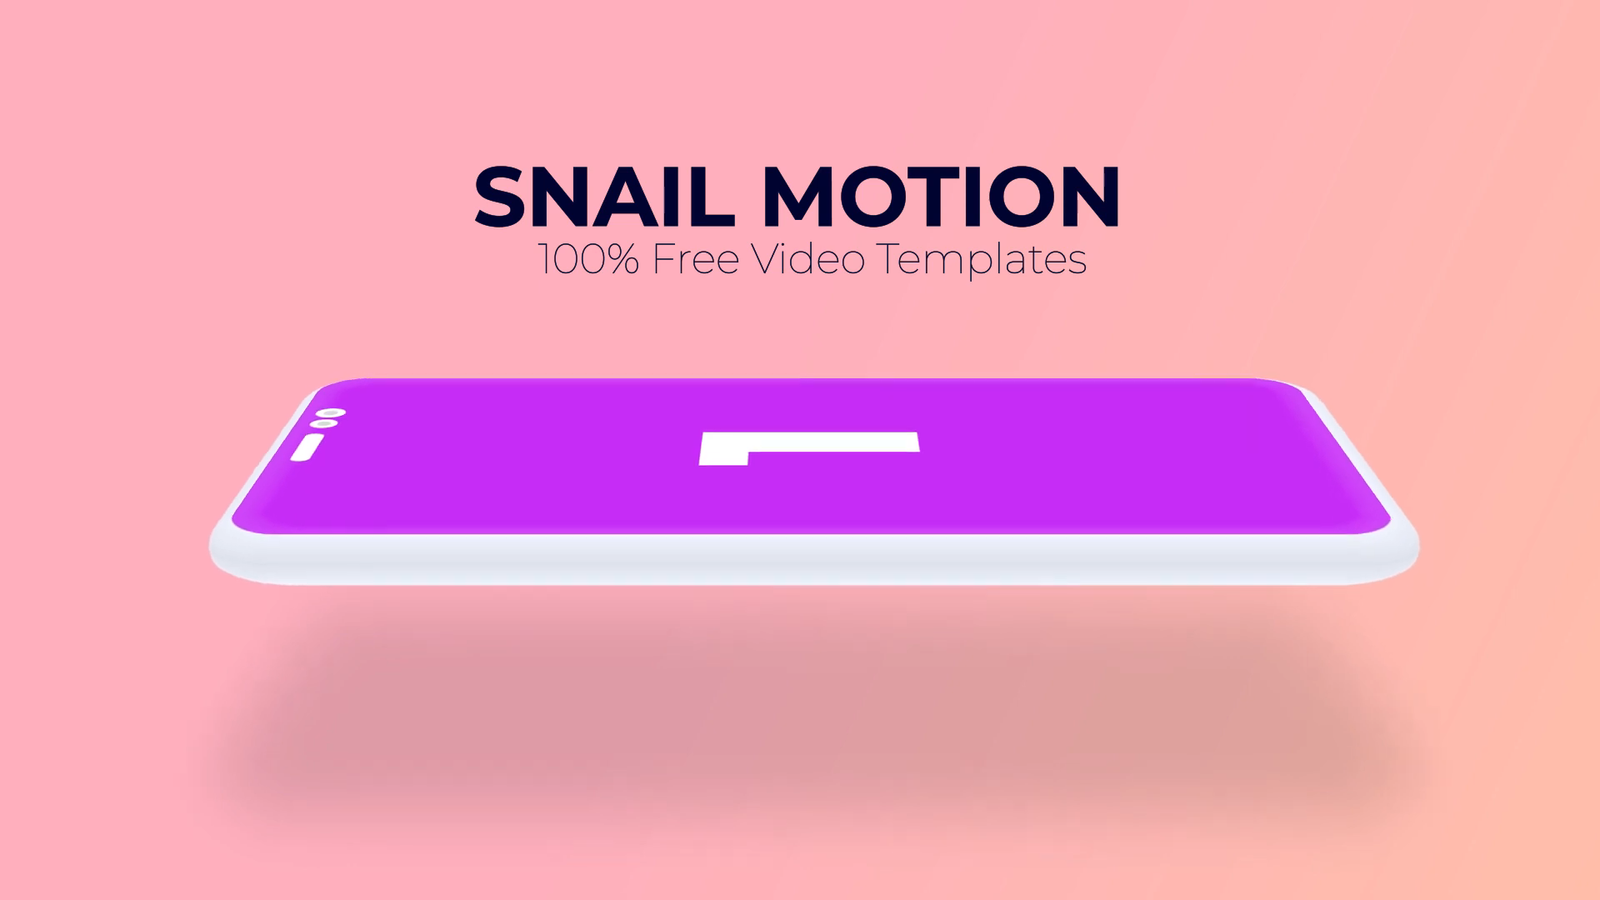 3d-mob-app-promo-after-effects-template-snail-motion